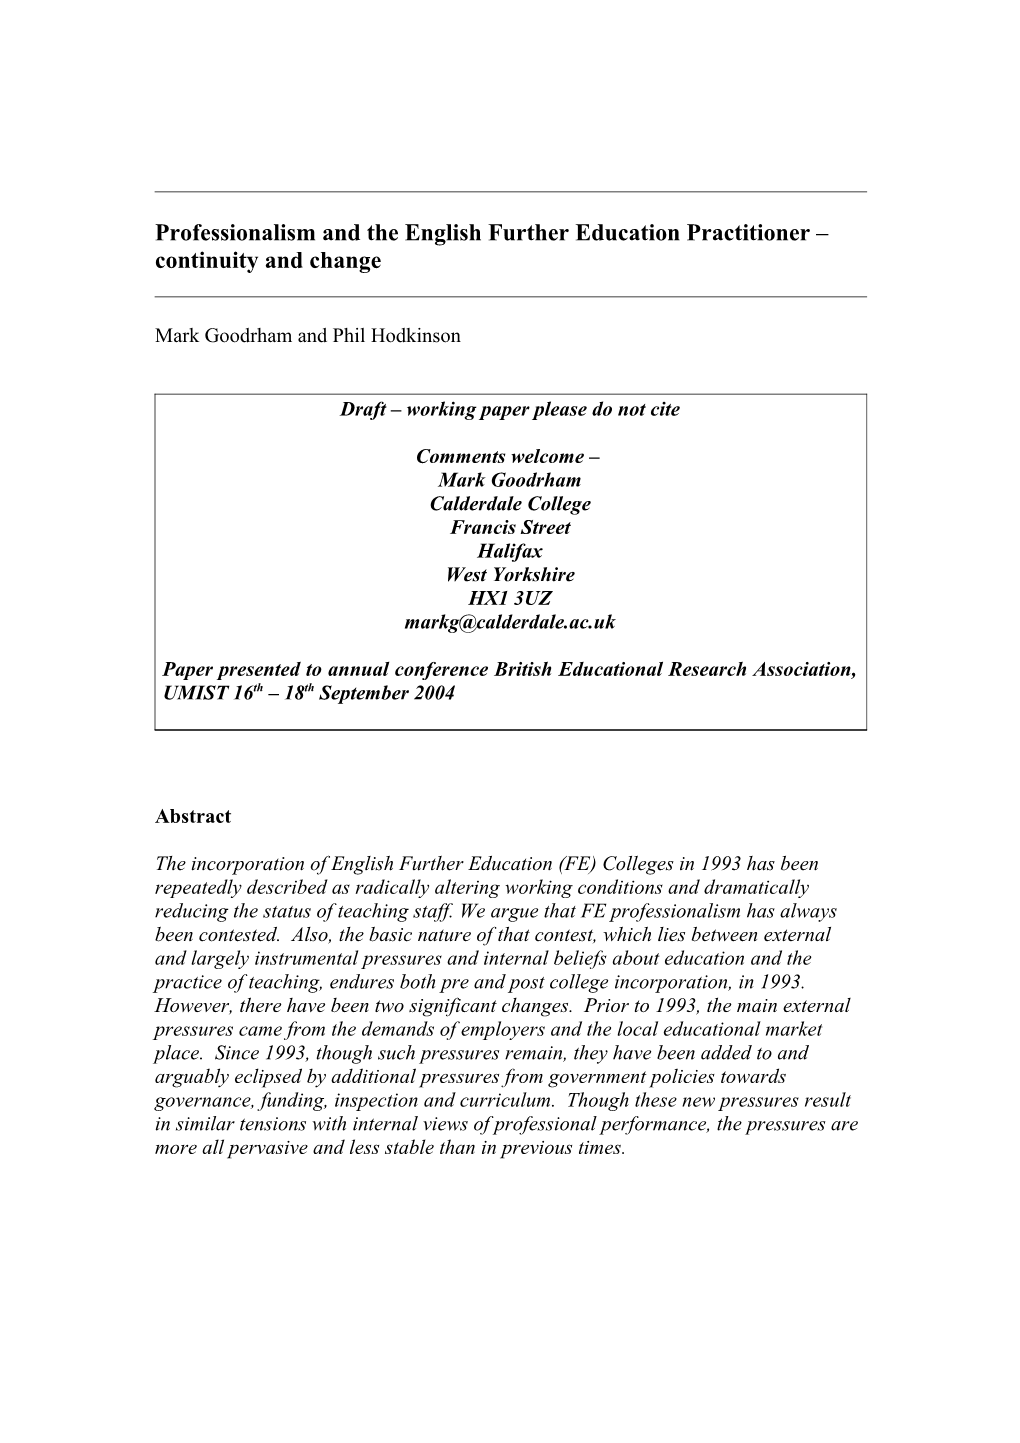 Professionalism and the English Further Education Practitioner Continuity and Change